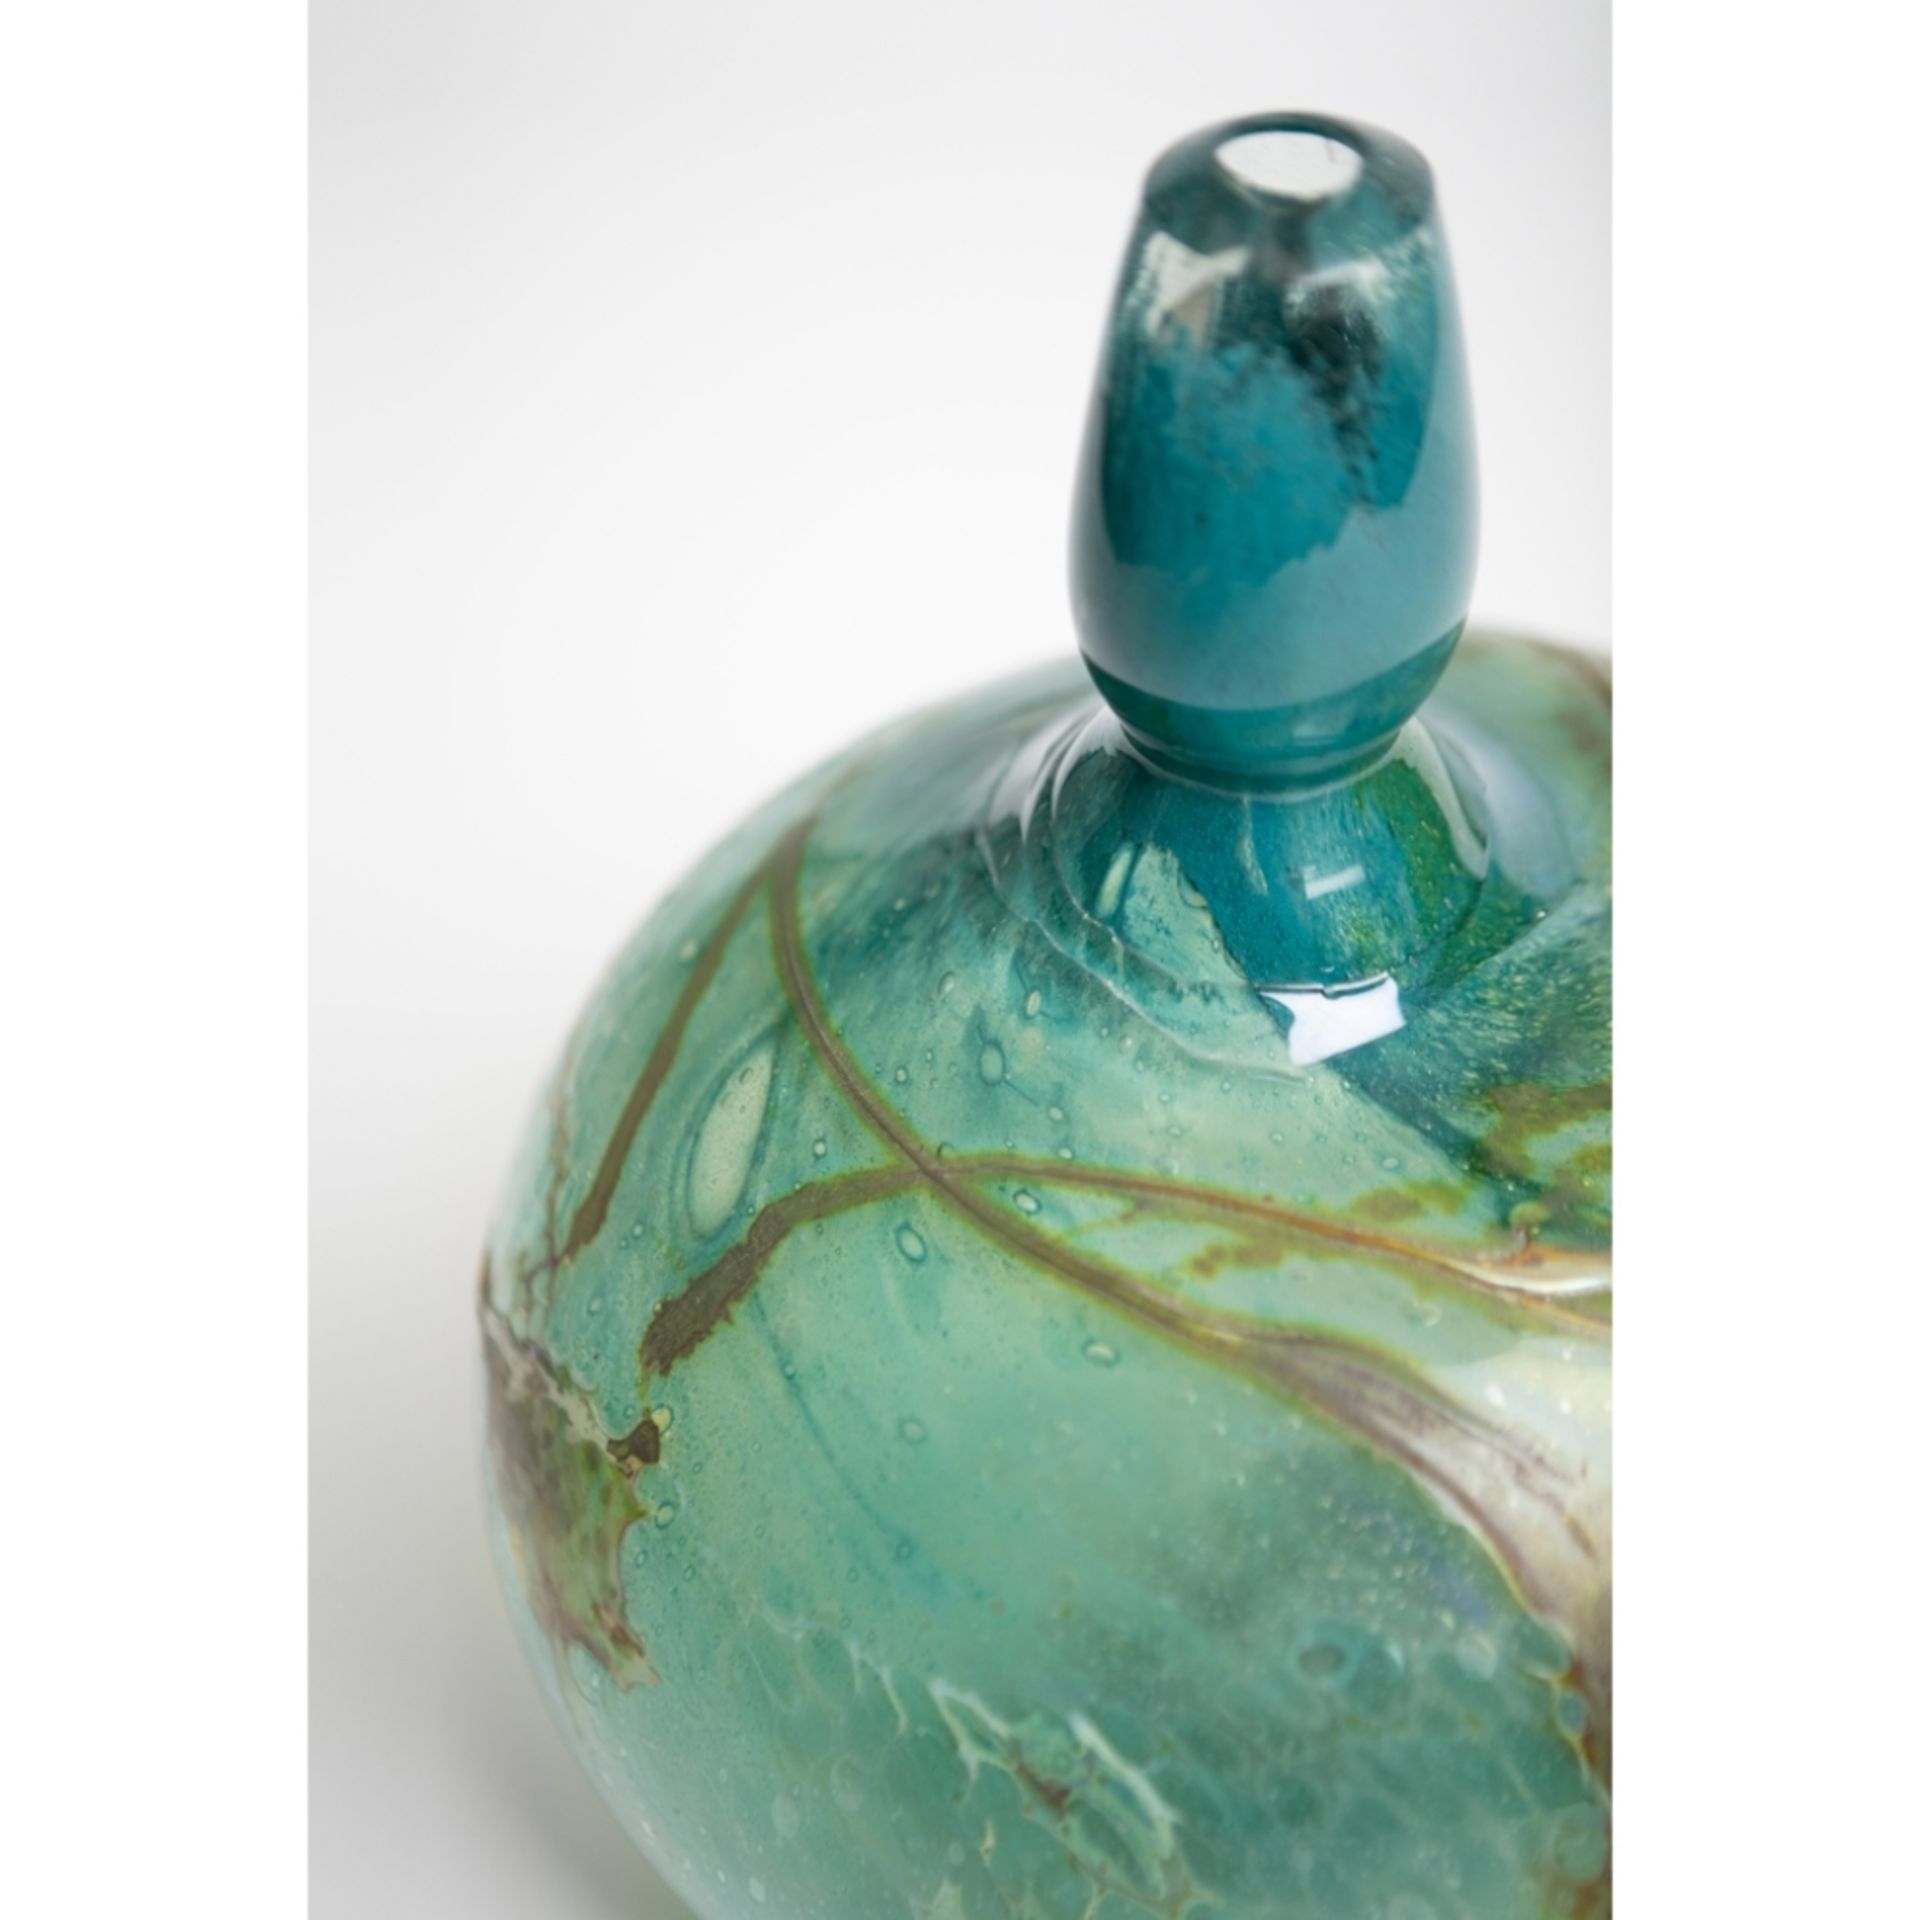 [§] SAM HERMAN (AMERICAN, B.1936)VESSEL, 1976 signed, dated and numbered 'SH1089', turquoise glass - Image 2 of 2